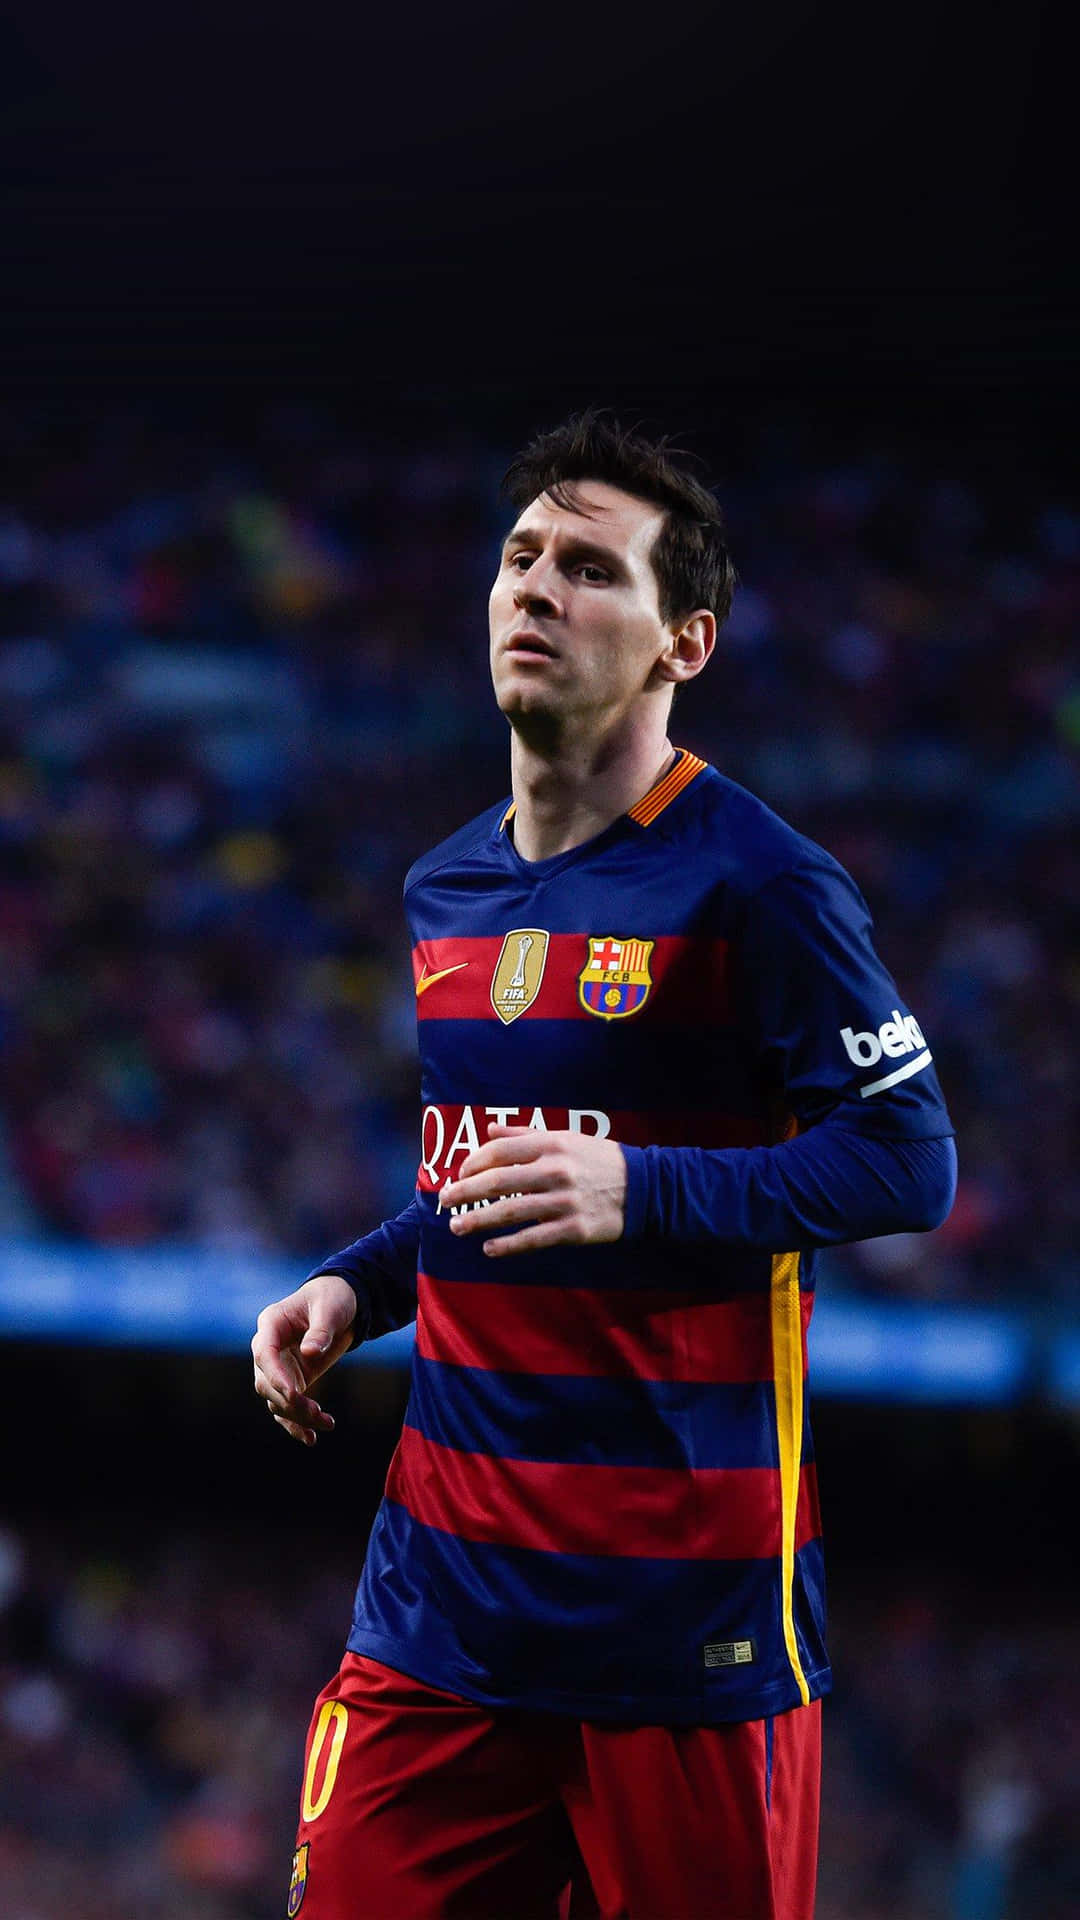 Argentine Football Star Lionel Messi Is The Face Of The New Iphone Wallpaper